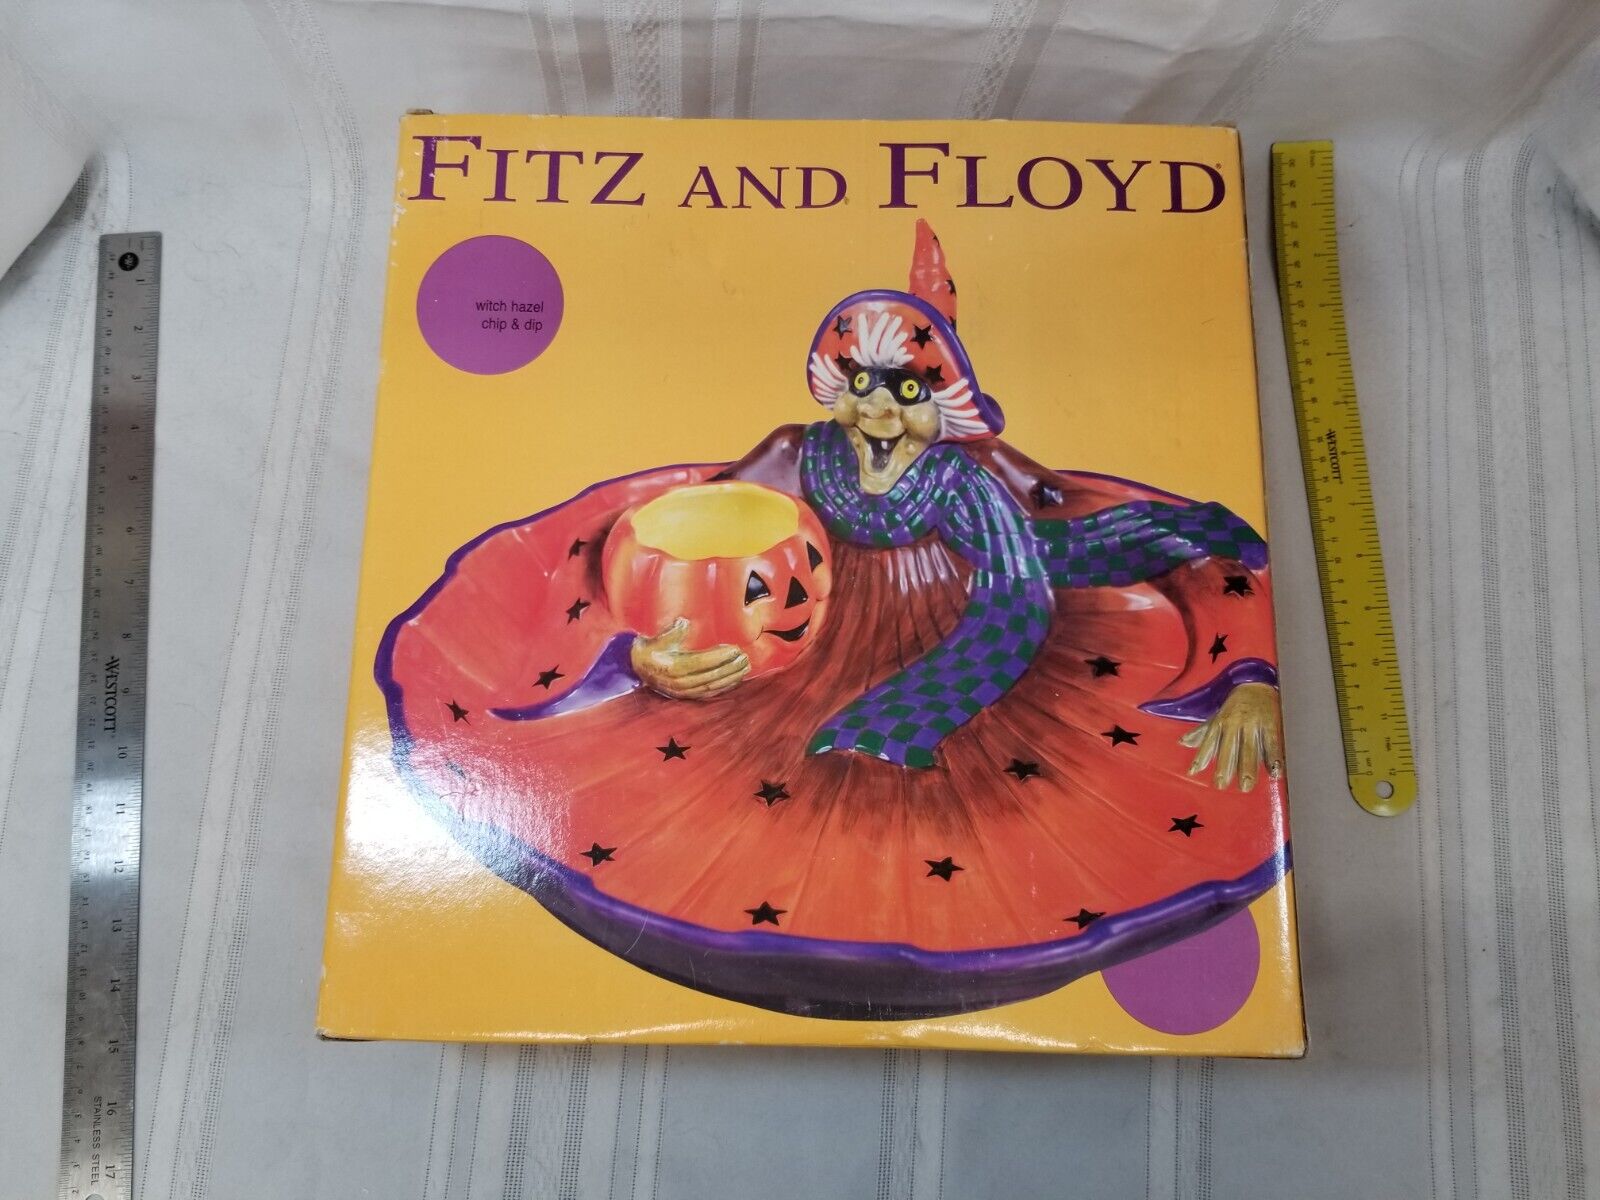 2003 Fitz and Floyd Witch Hazel Collection Chip & Dip in Original Box Halloween